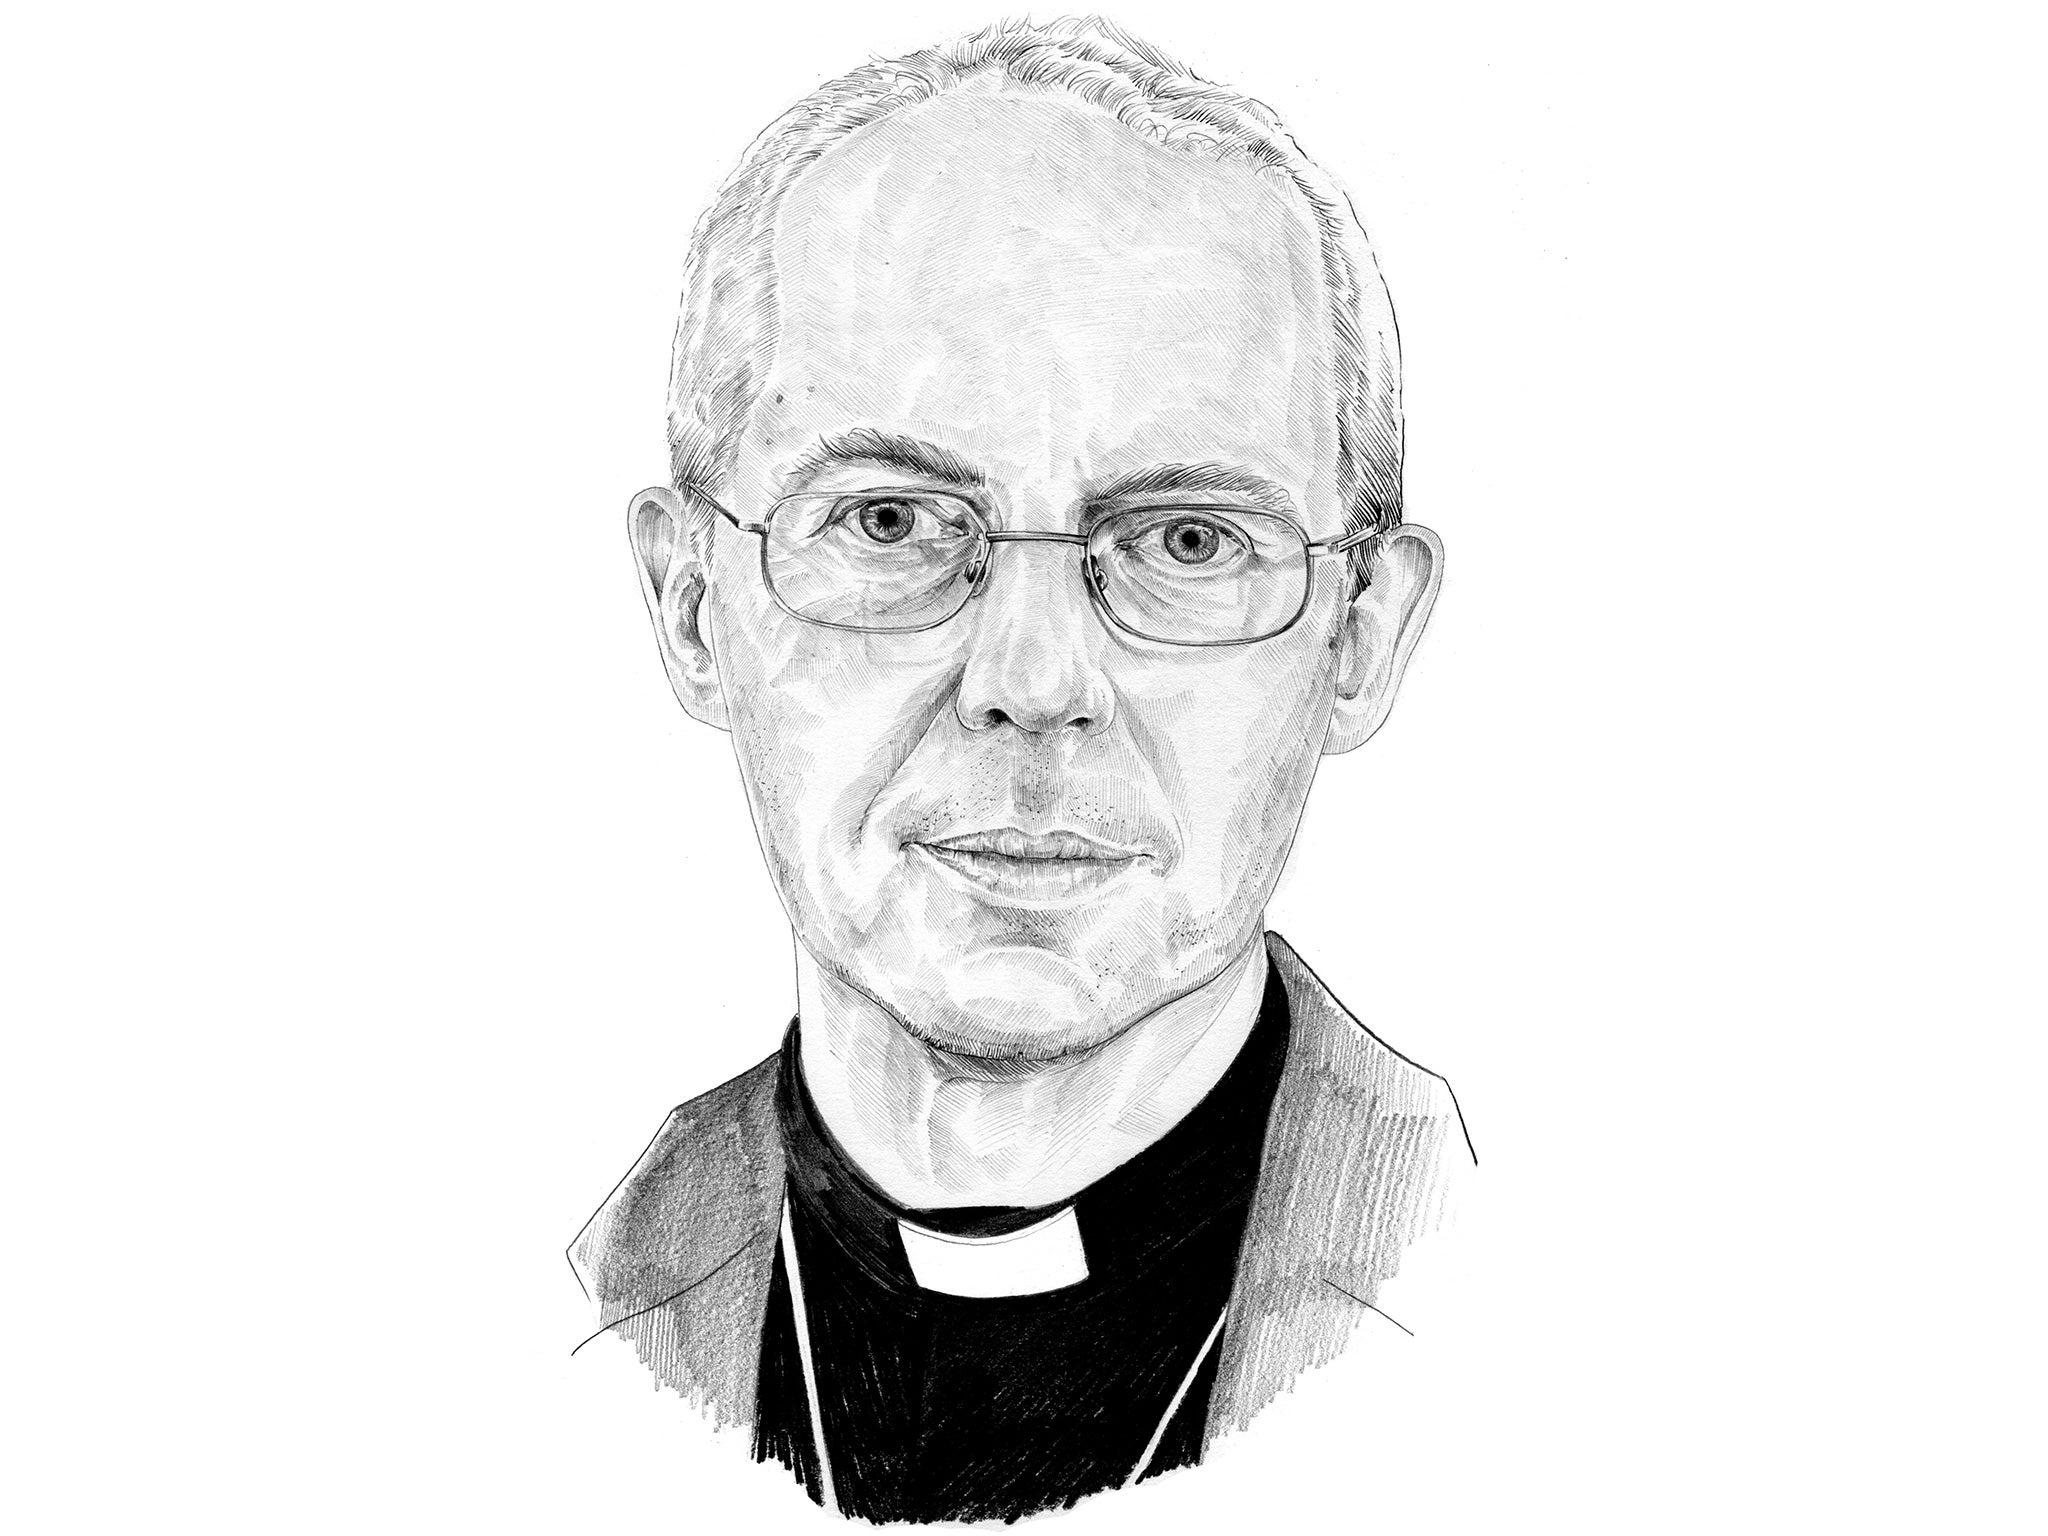 Welby has produced a letter to guide Anglicans on voting